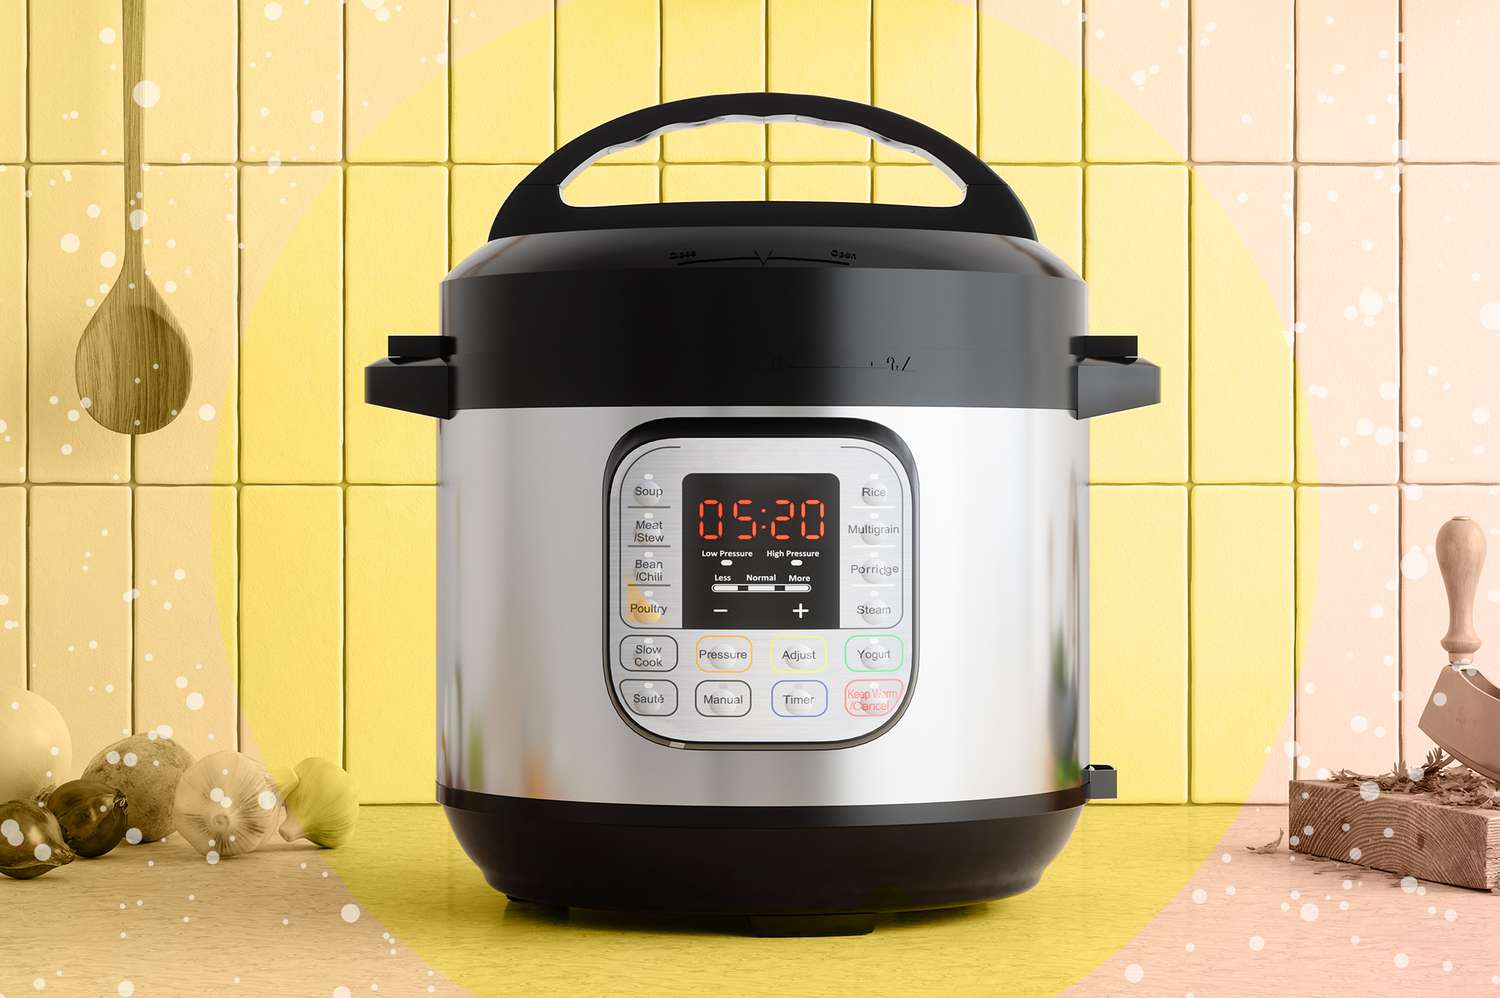 How To Use The Electric Pressure Cooker